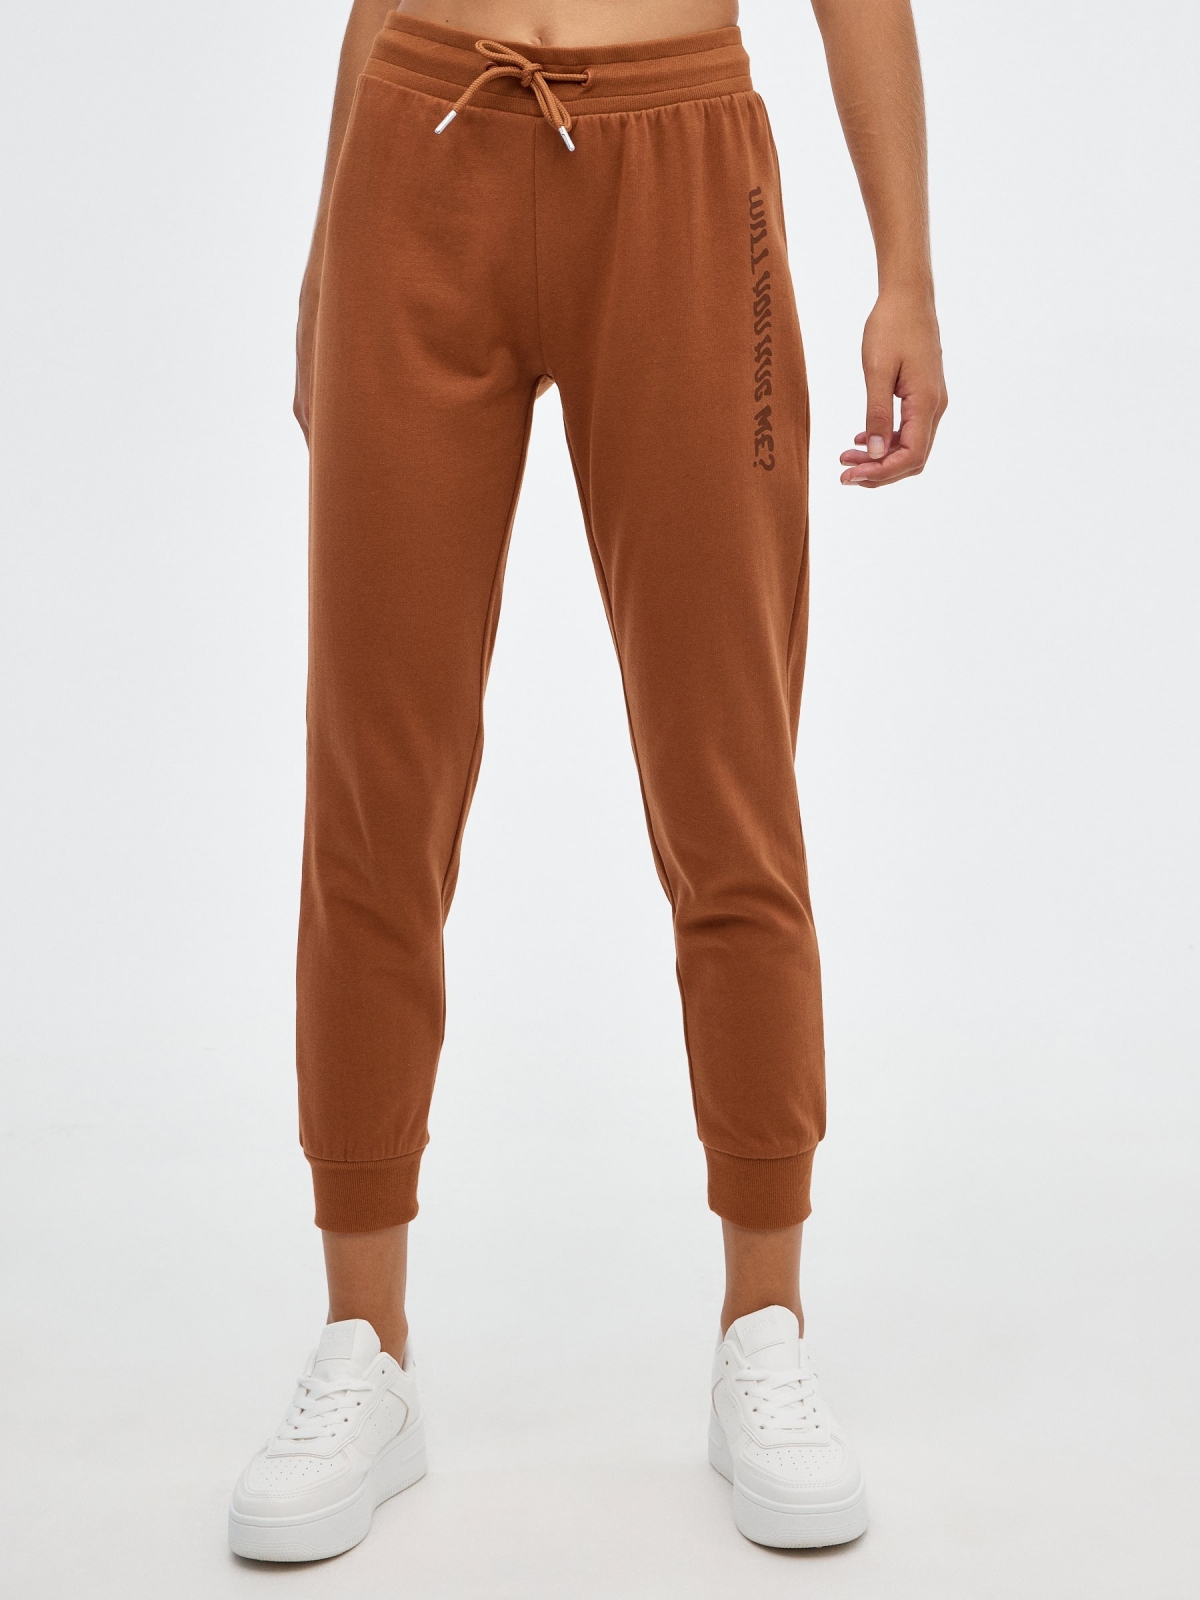 Graphic print jogger pants brown middle front view